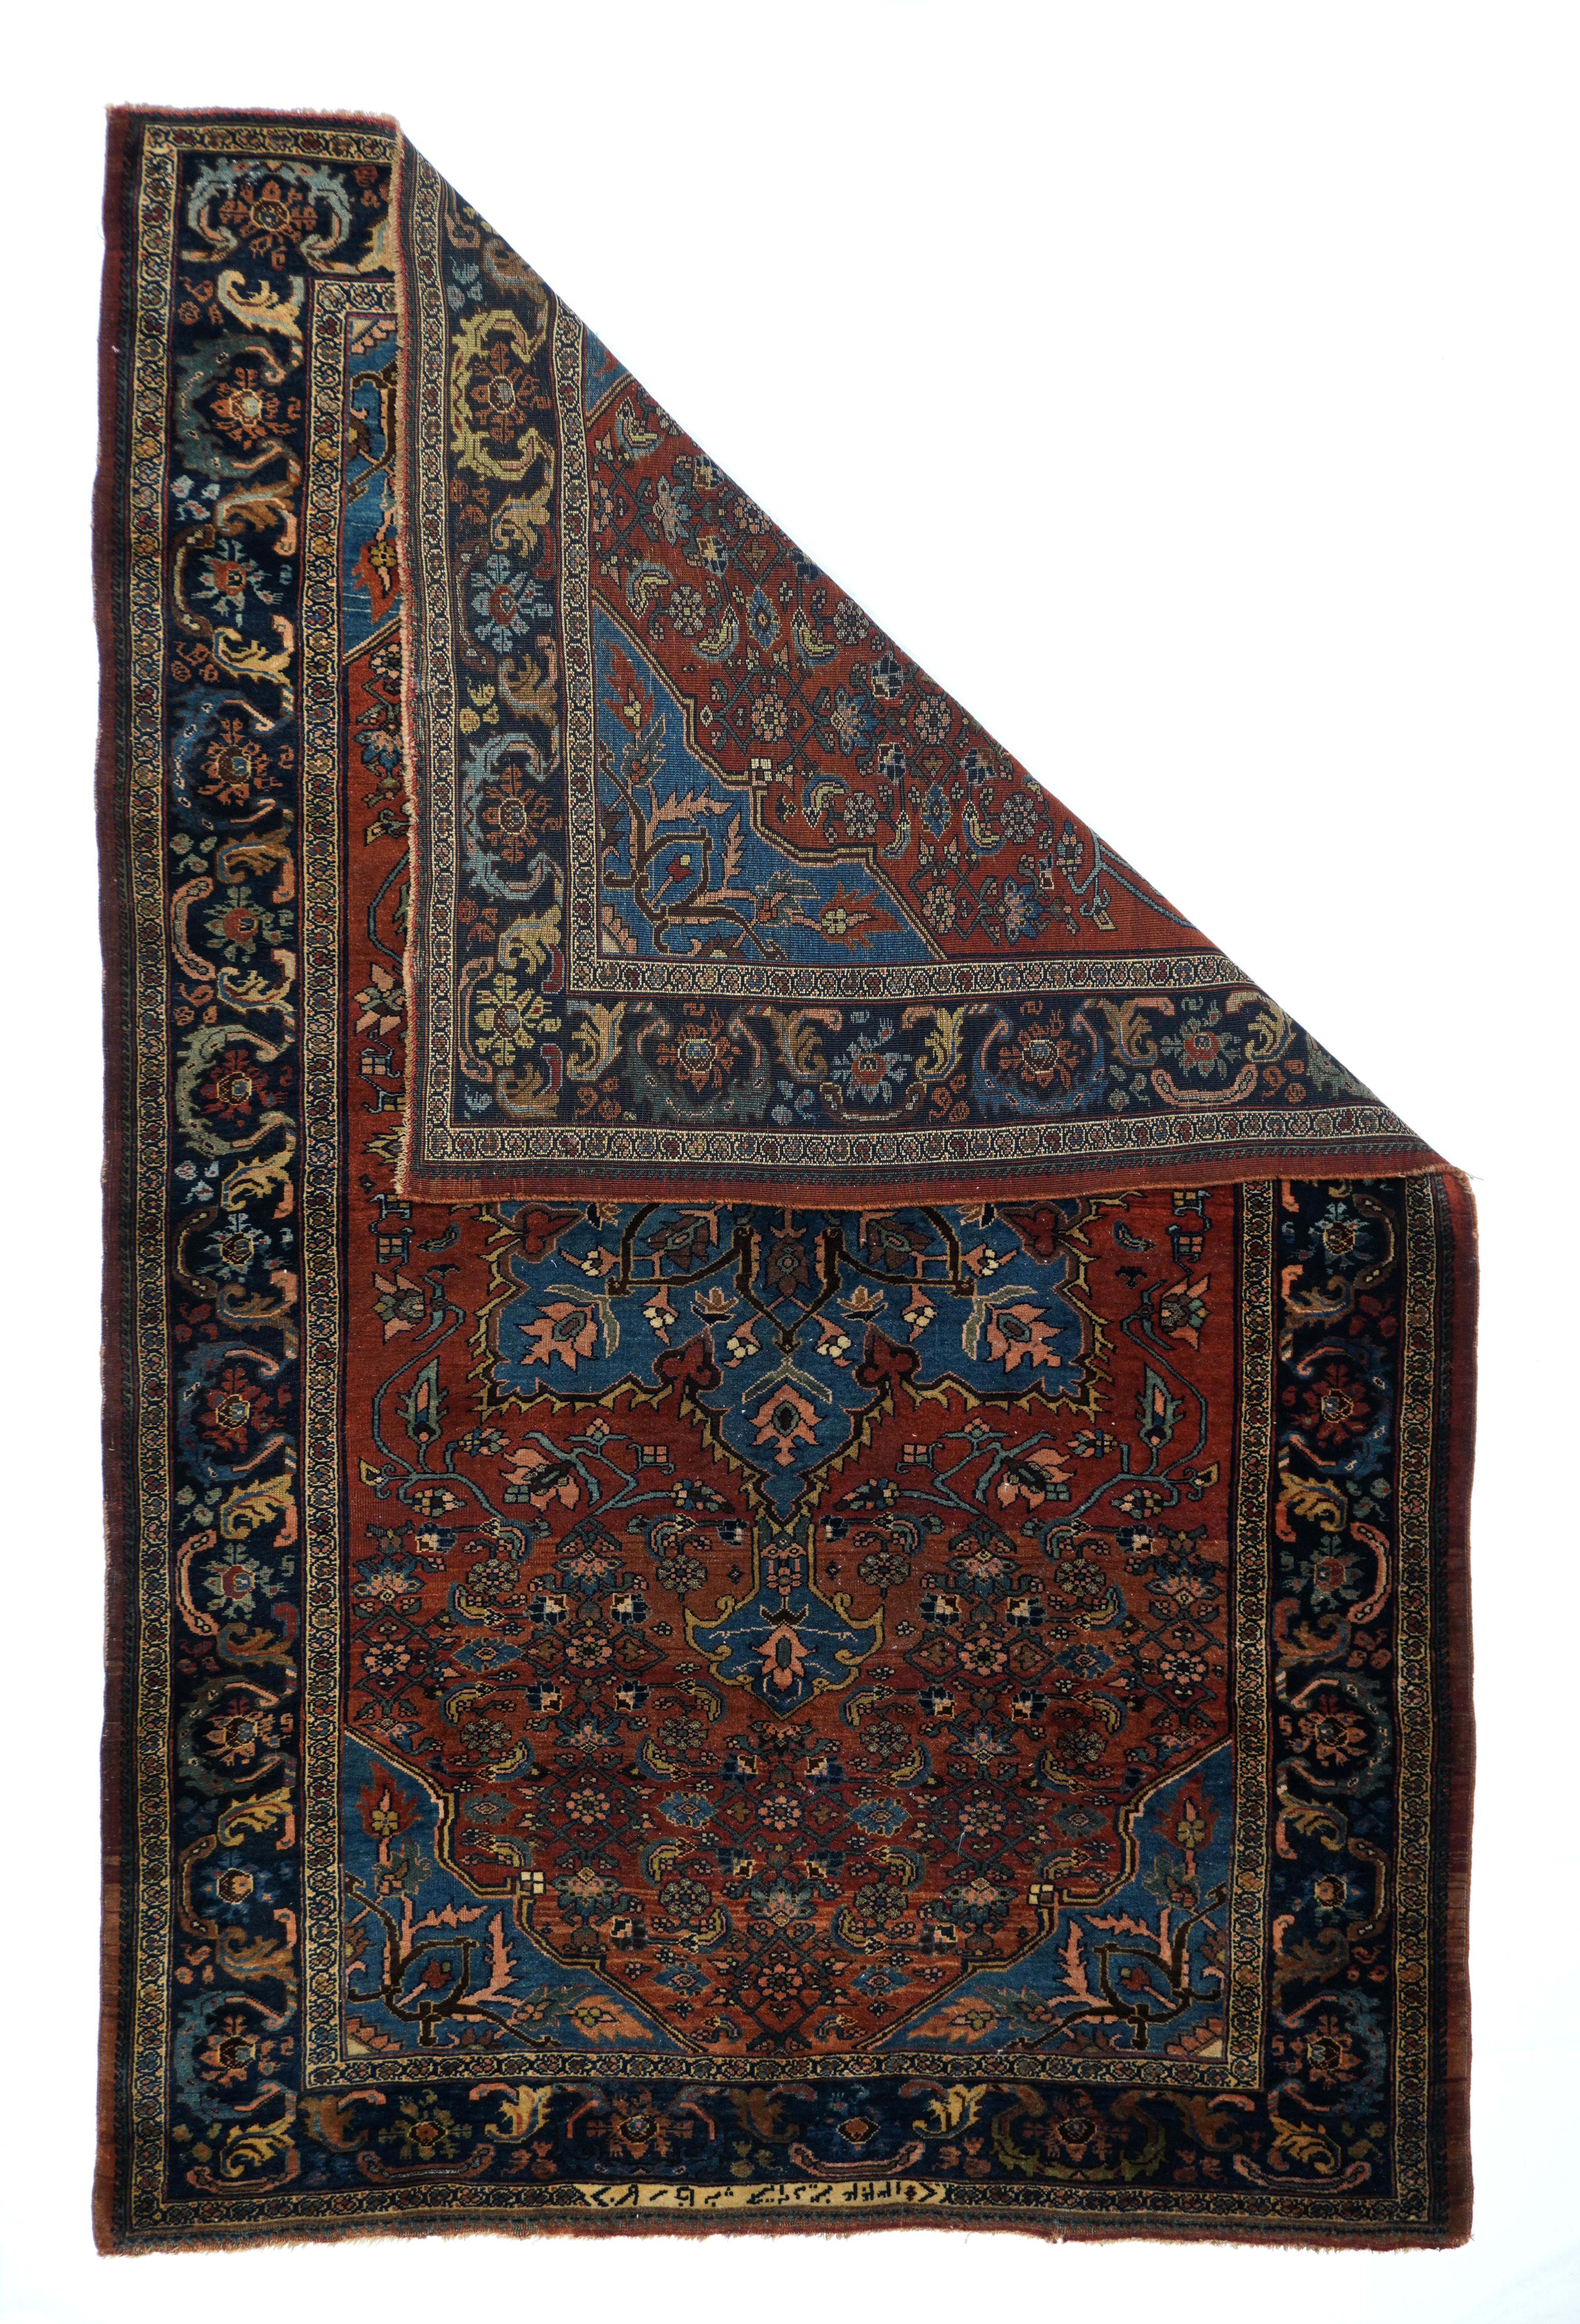 West Persian Kurdish Bidjar rugs, whether town or village, are very rarely dated and/or signed, making this scatter with an “iron” construction just that much more desirable.
With all natural dyes, the roughly fringed octogramme teal palmette